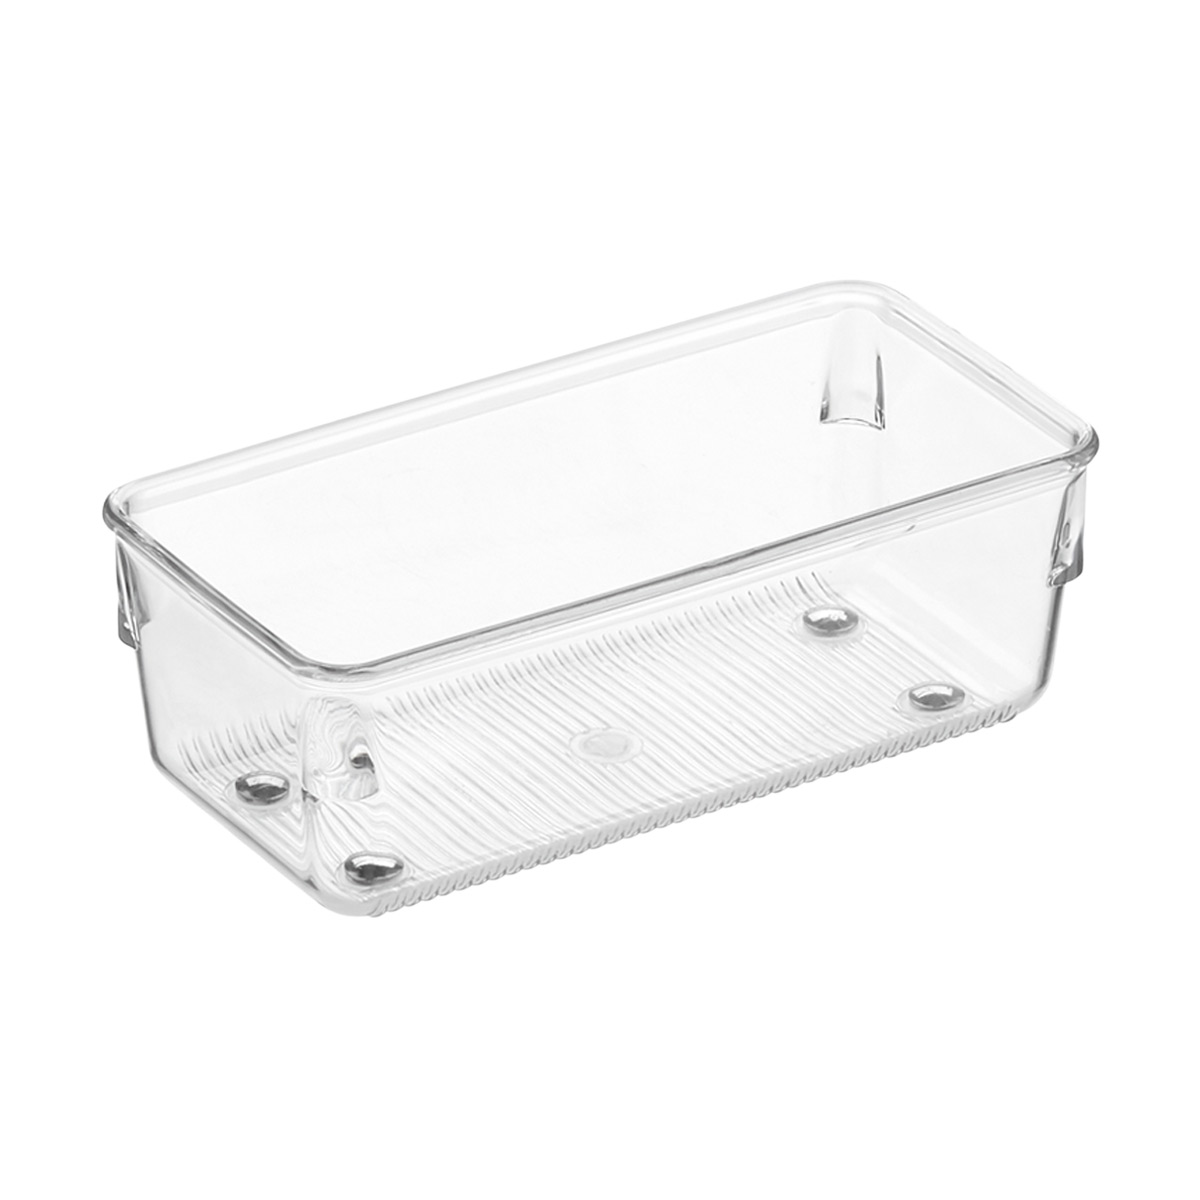 https://www.containerstore.com/catalogimages/348692/10037077-linus-shallow-drawer-organi.jpg